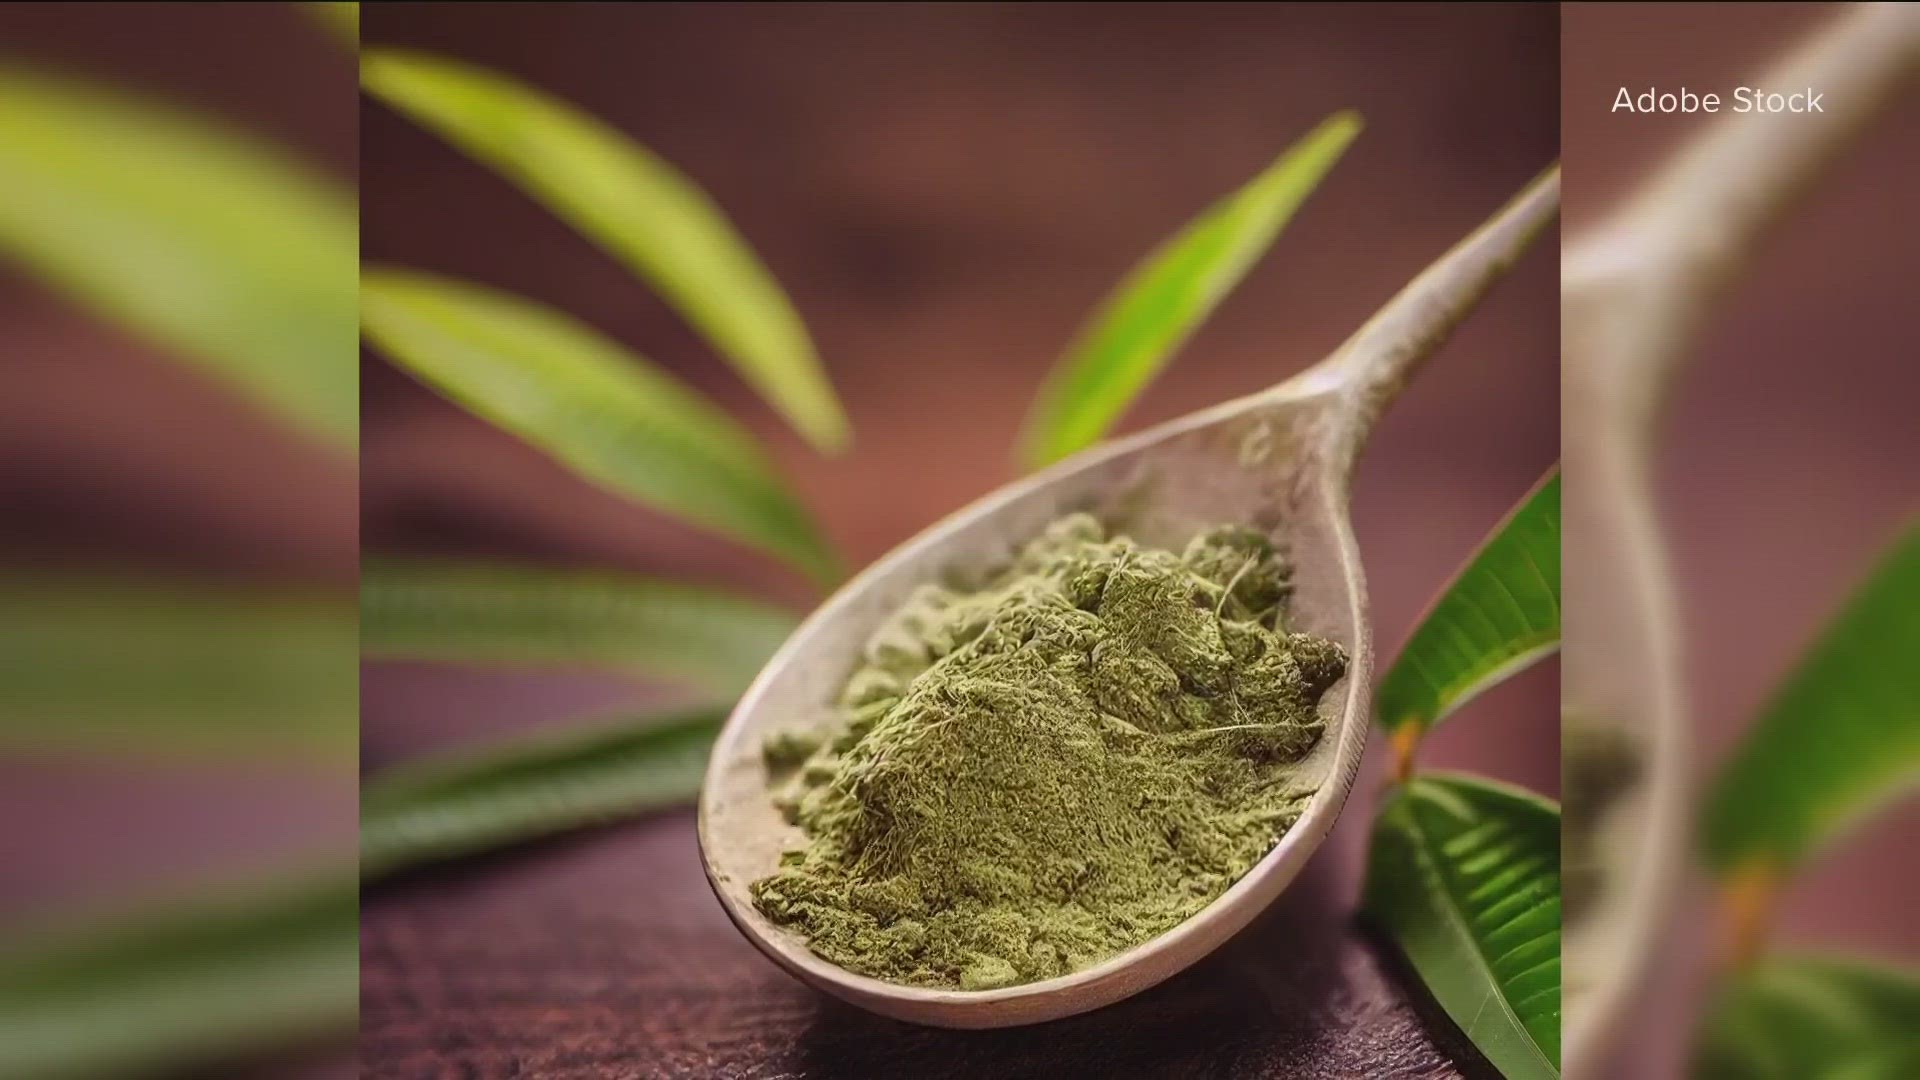 Texas is taking new steps to regulate a controversial supplement. Lawmakers passed a bill to create new rules for kratom, to make sure what's being sold is safe.